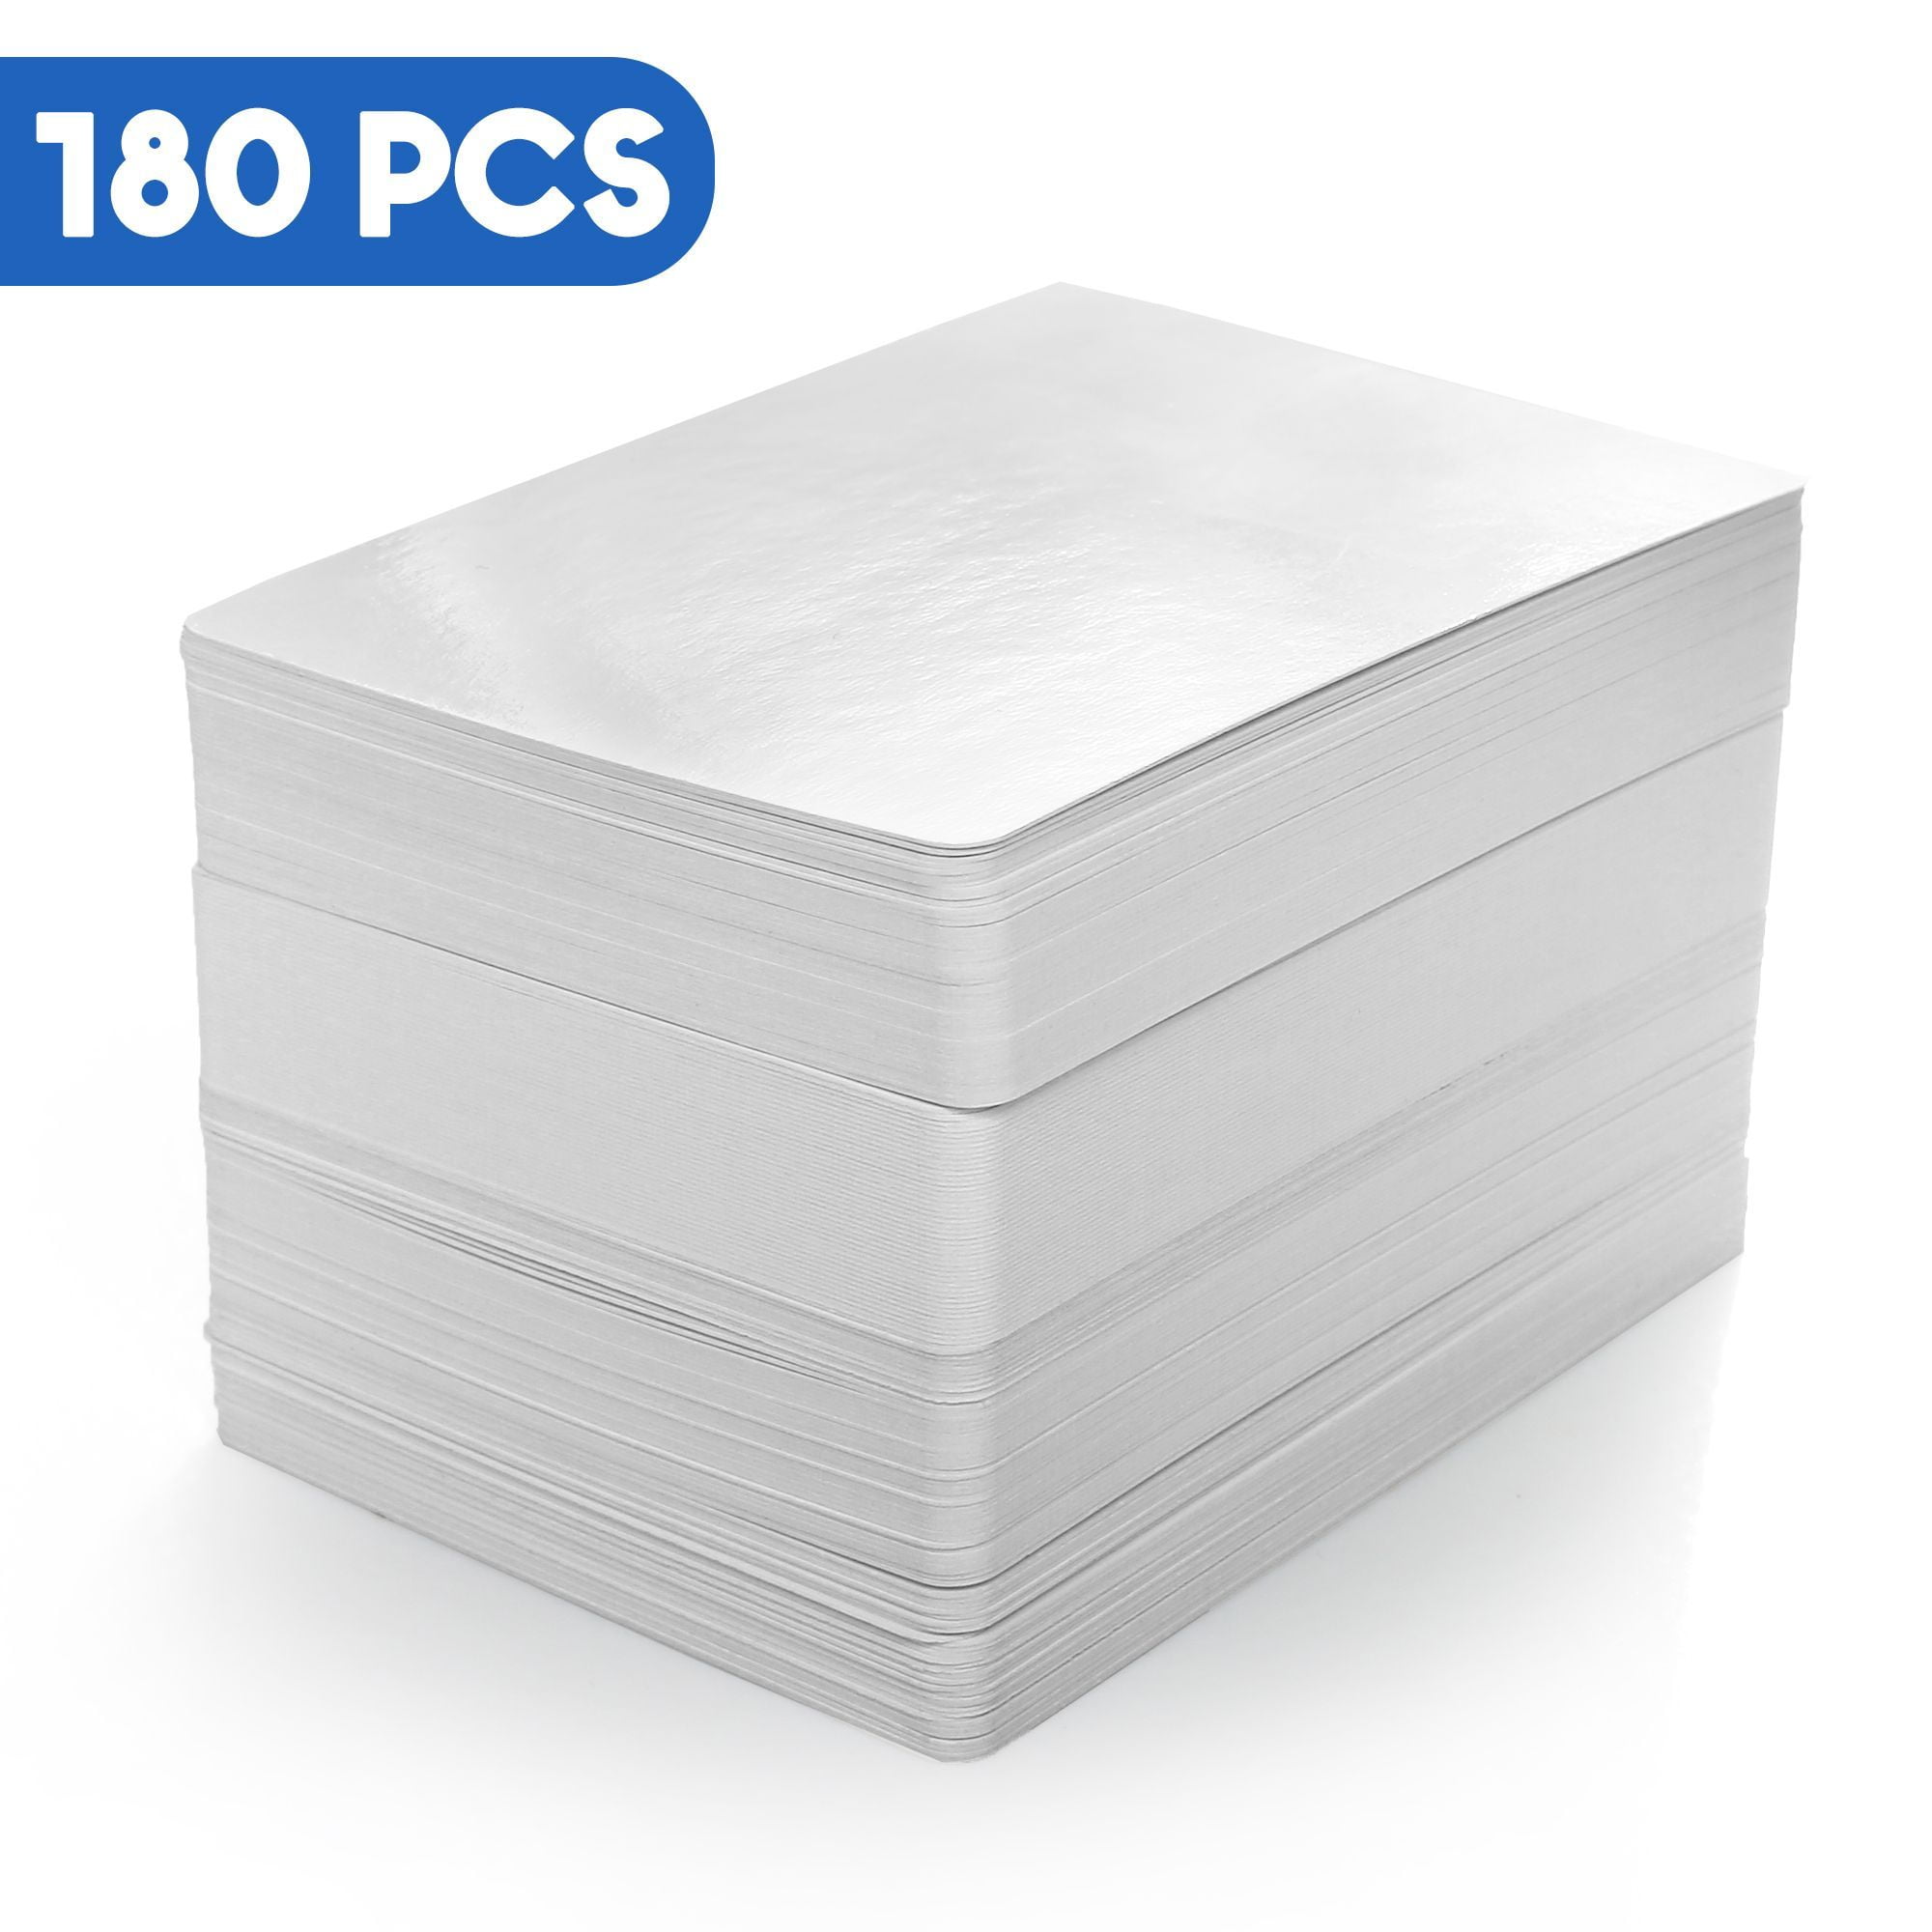 180Pcs Dry Erase Blank Playing Cards Kids Learning Game Card